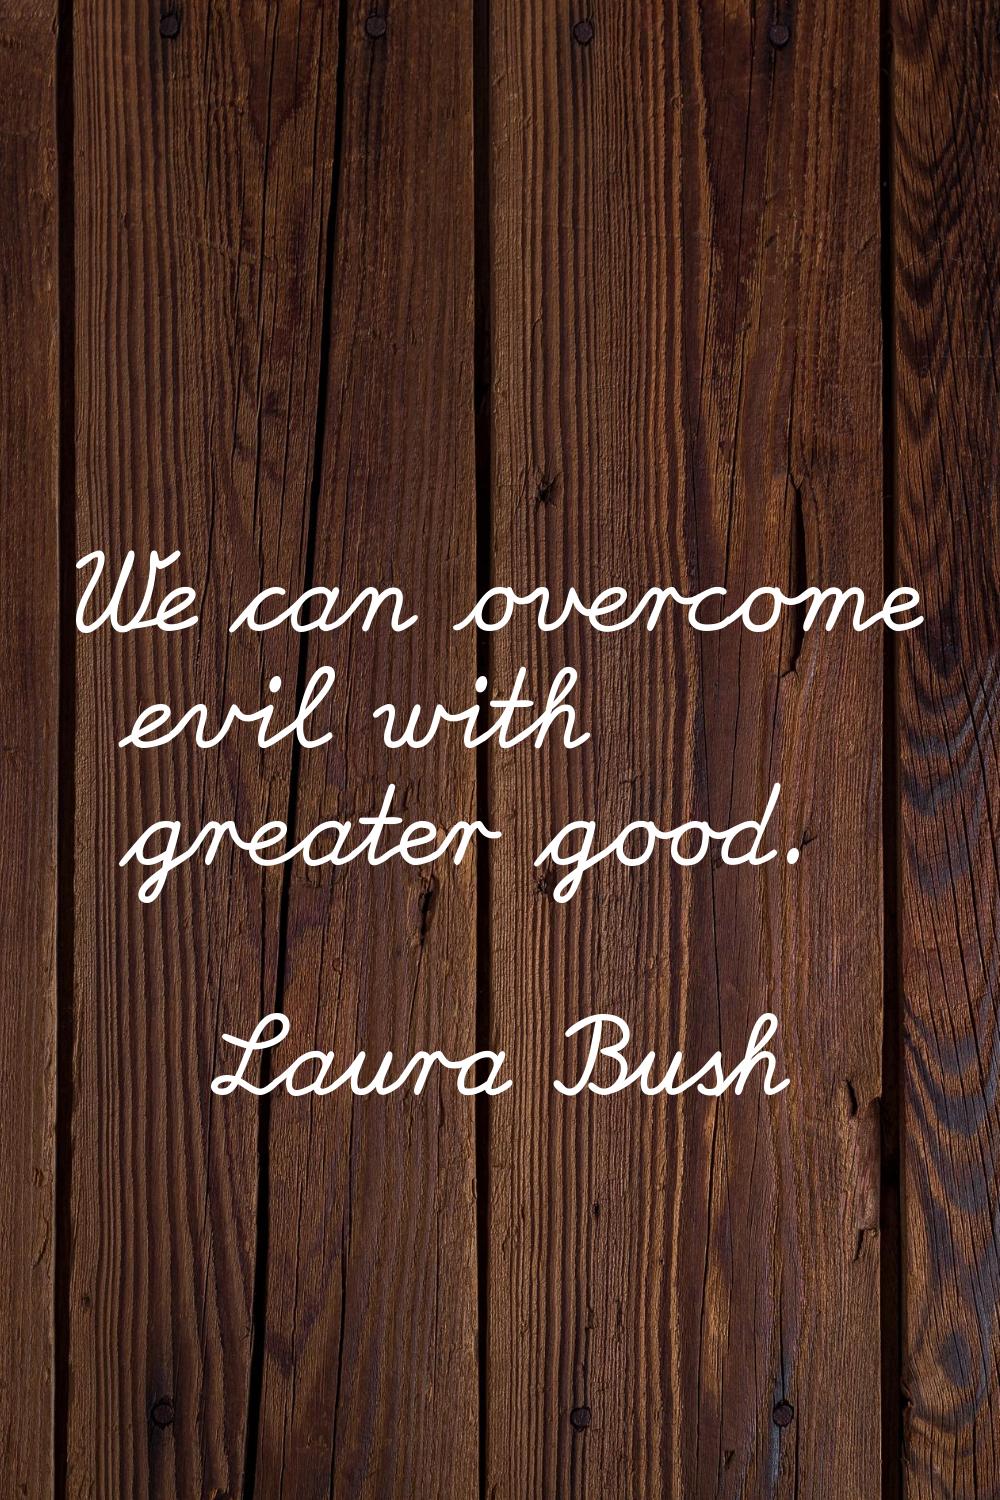 We can overcome evil with greater good.